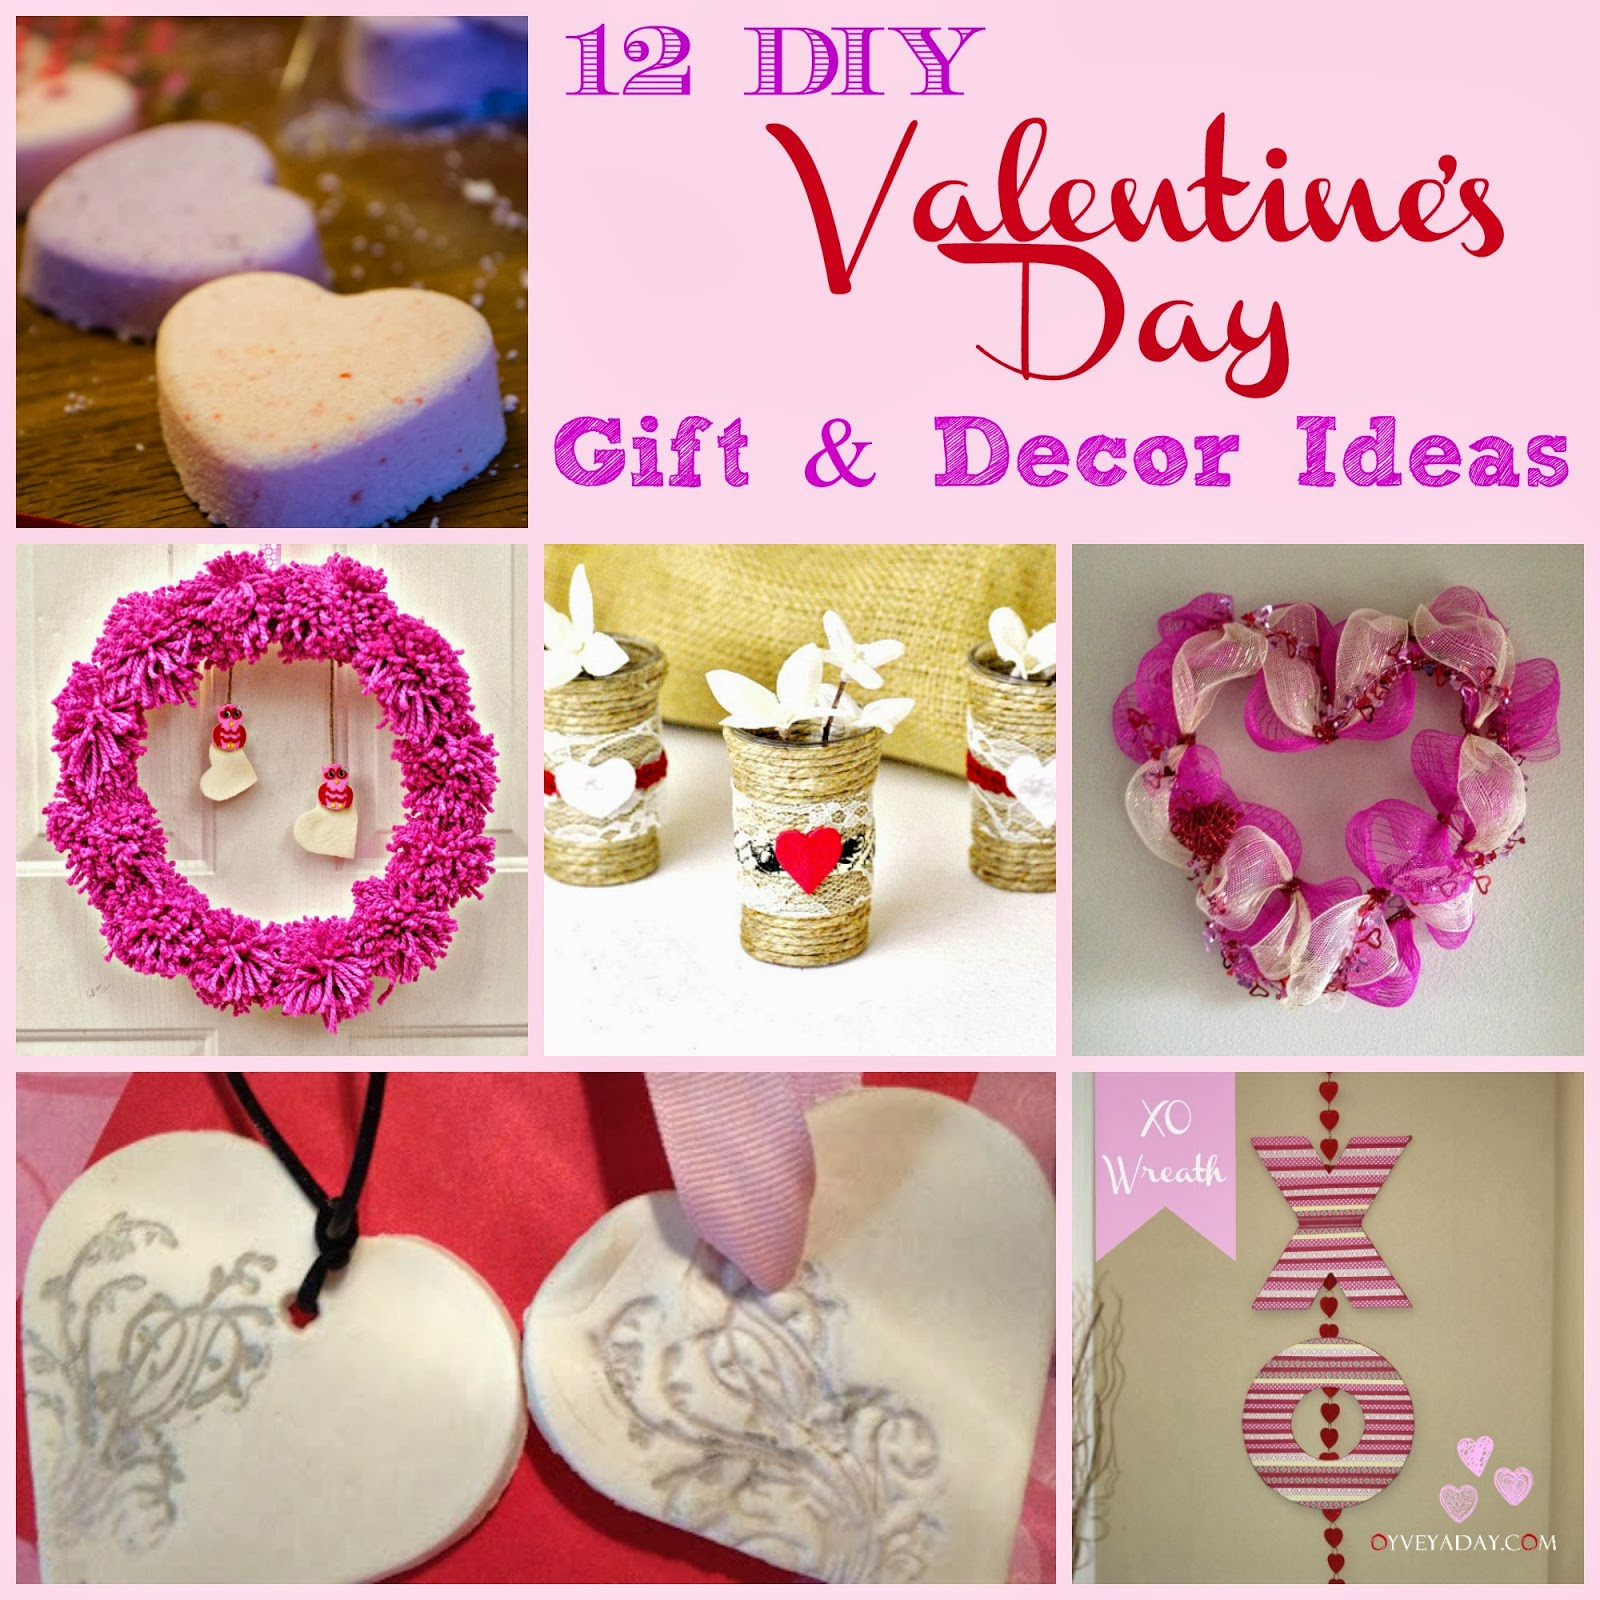 Diy Valentine Day Gift Ideas
 12 DIY Valentine s Day Gift & Decor Ideas Outnumbered 3 to 1